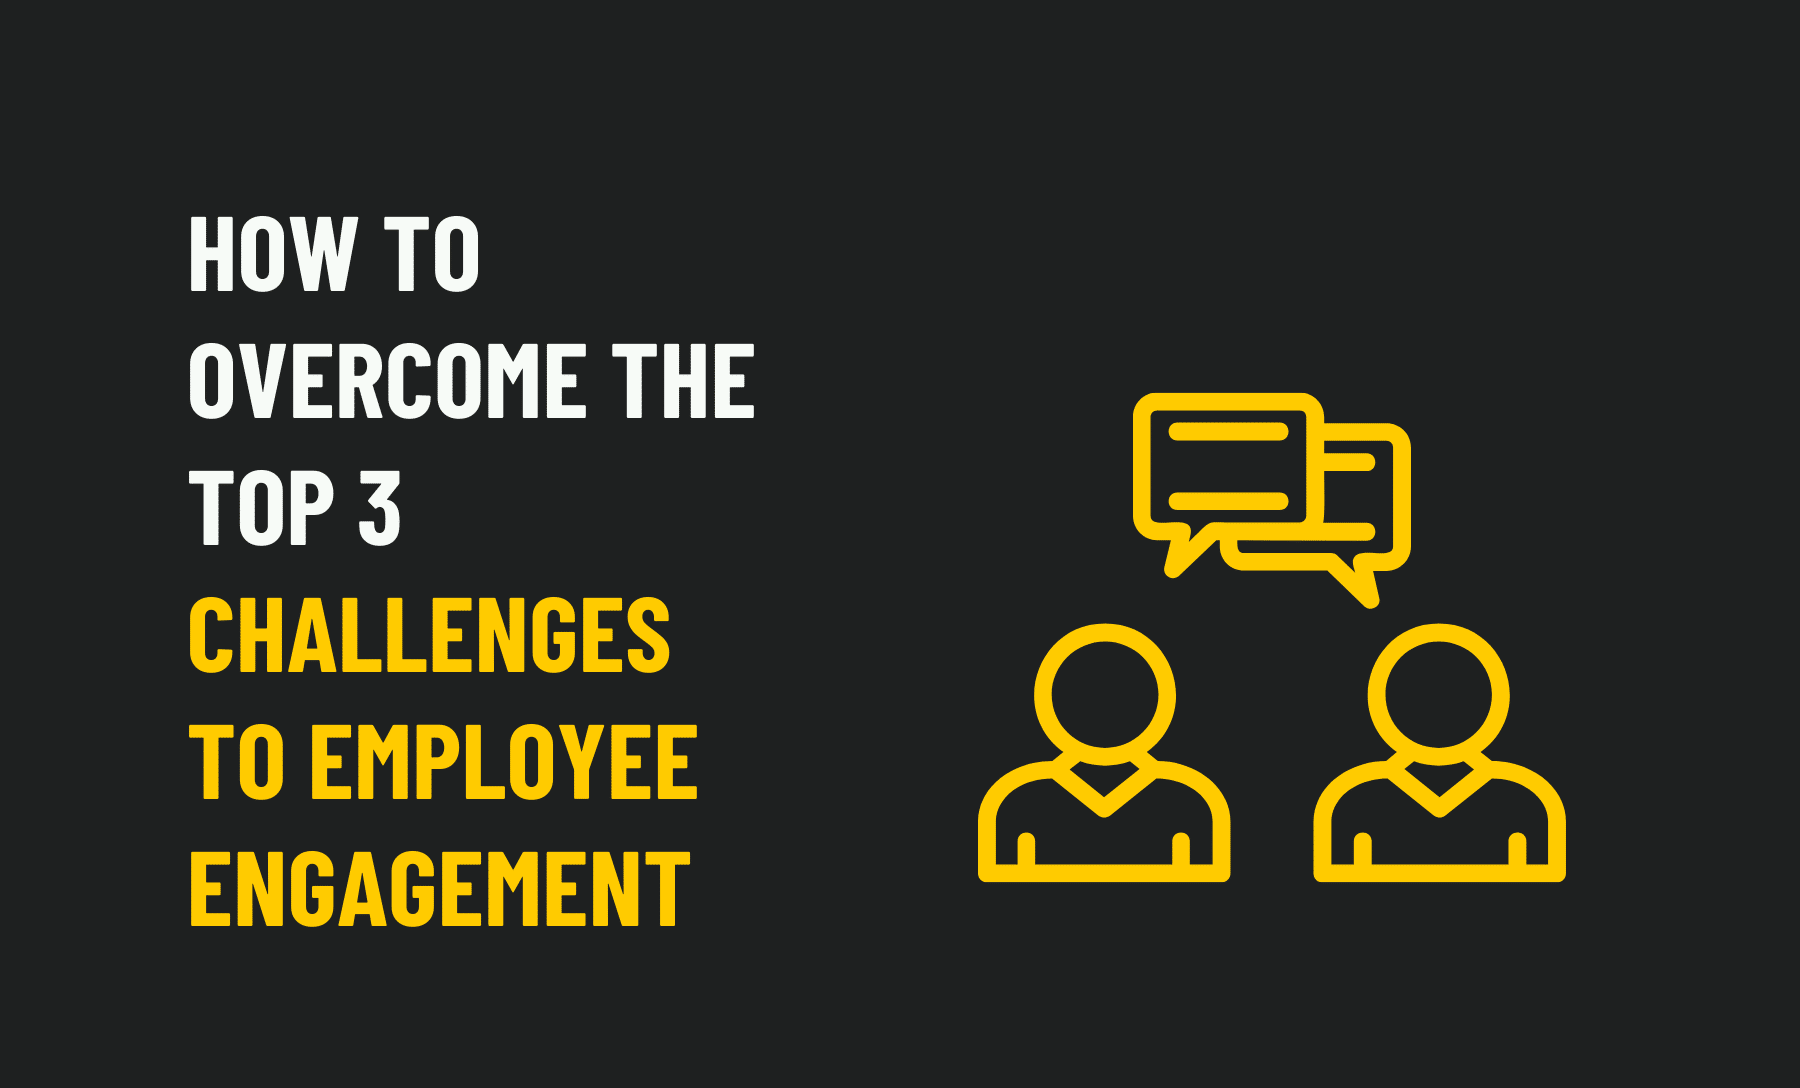 How to Overcome the Top 3 Challenges to Employee Engagement